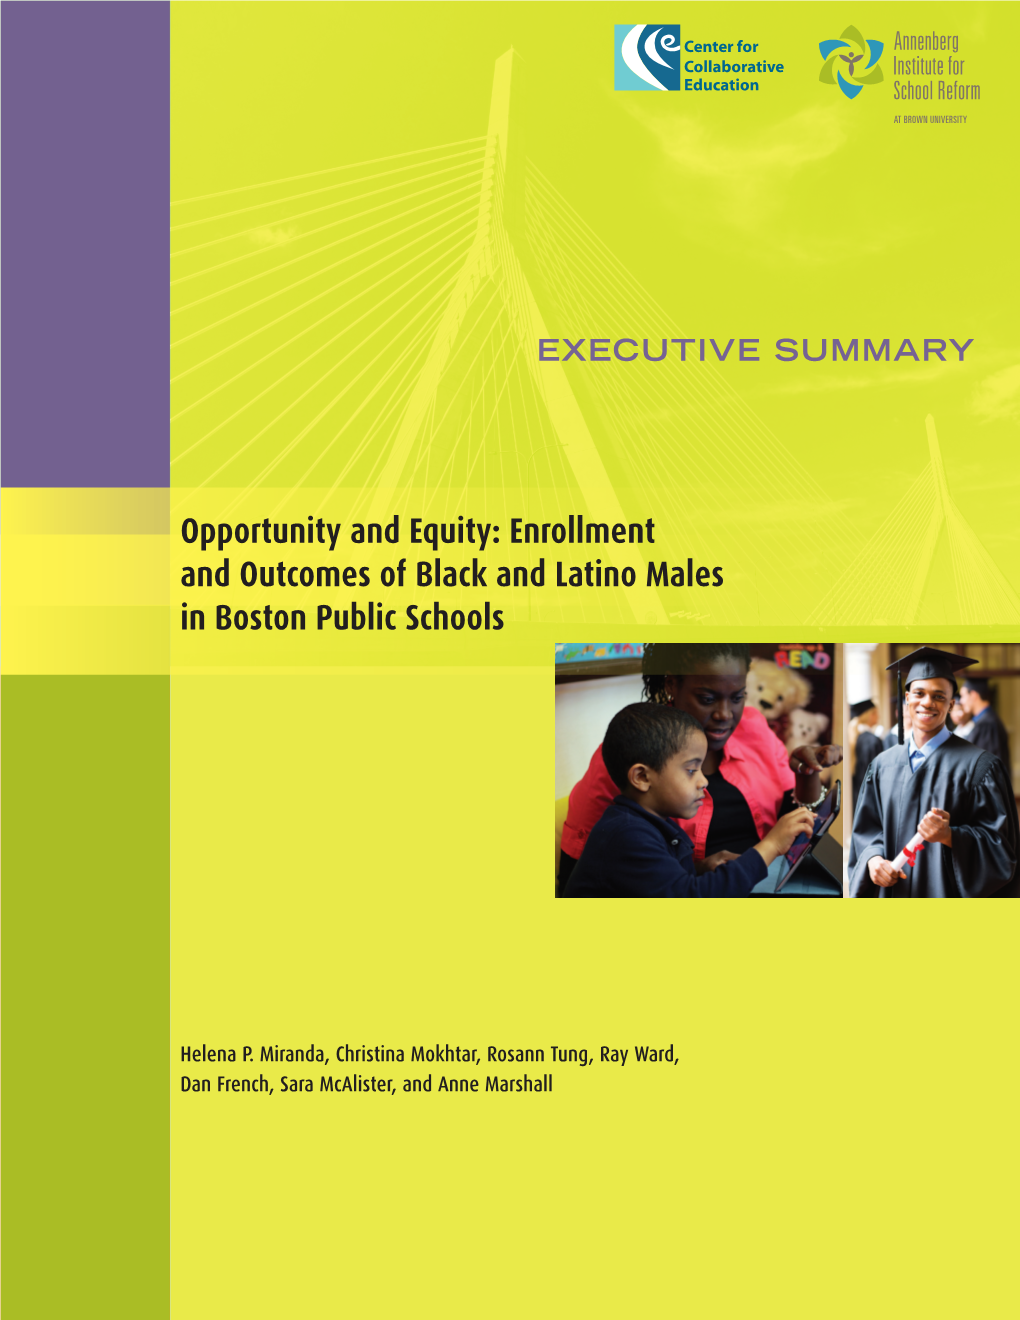 Opportunity and Equity: Enrollment and Outcomes of Black and Latino Males in Boston Public Schools